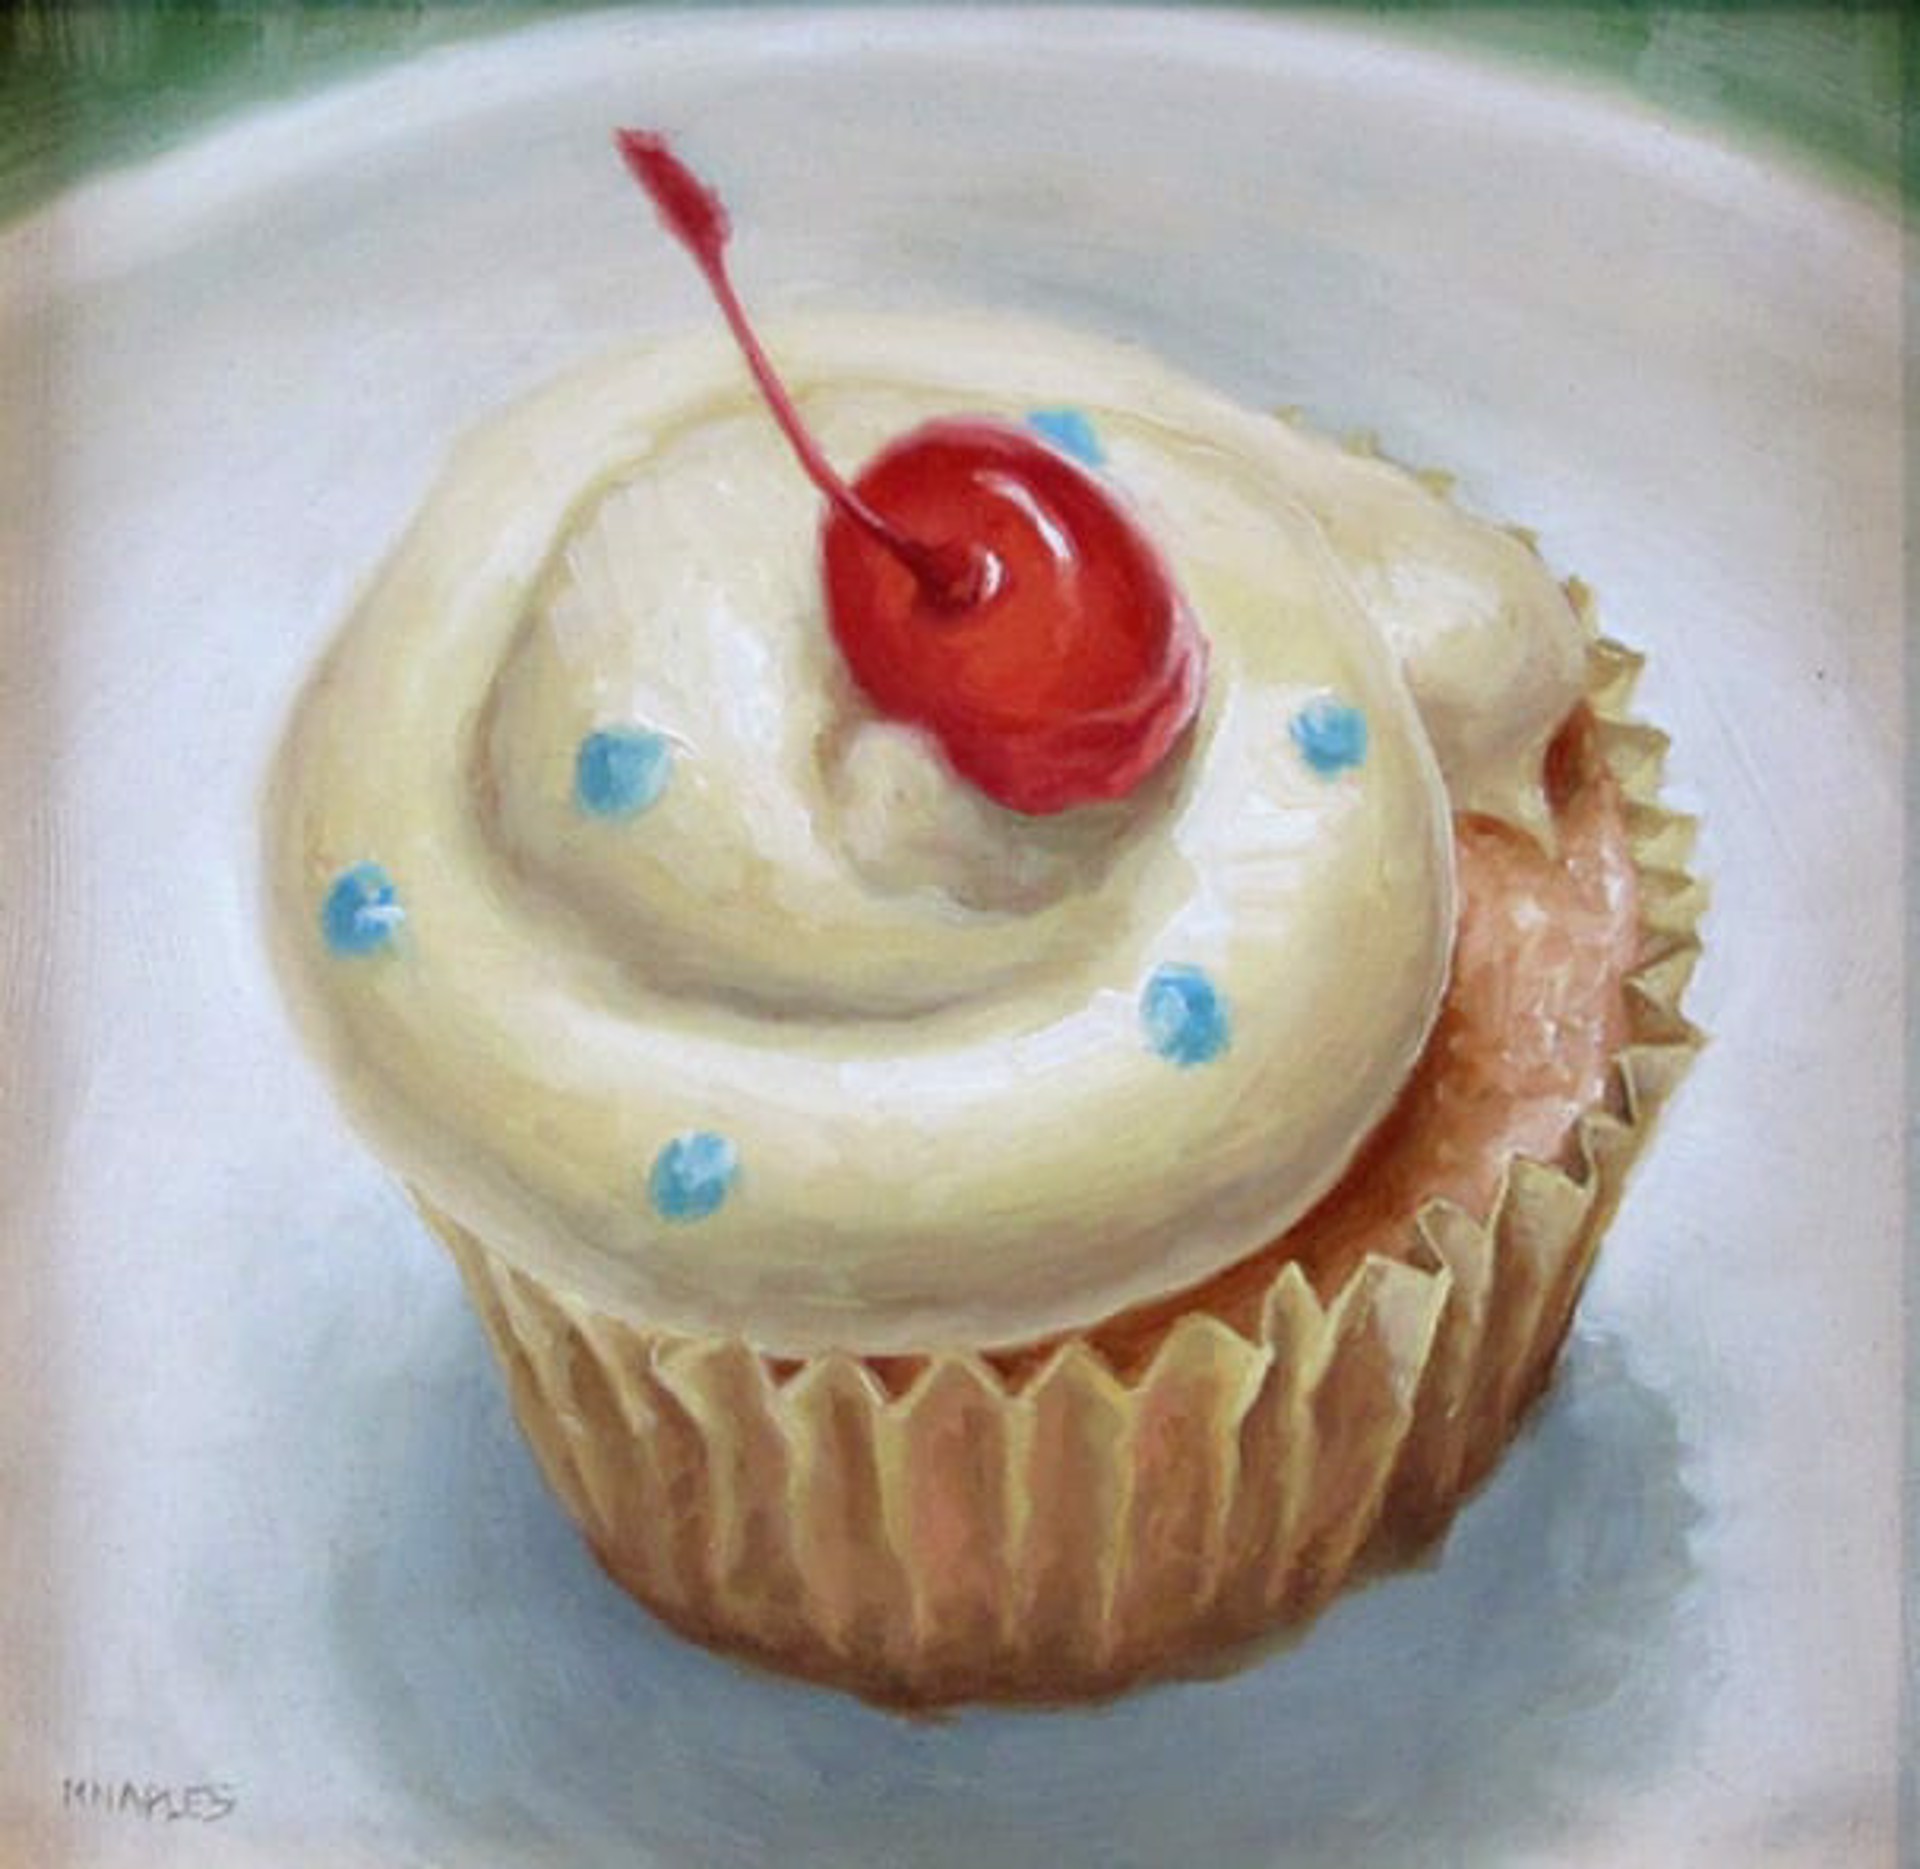 Nathalie's Cupcake by Michael Naples